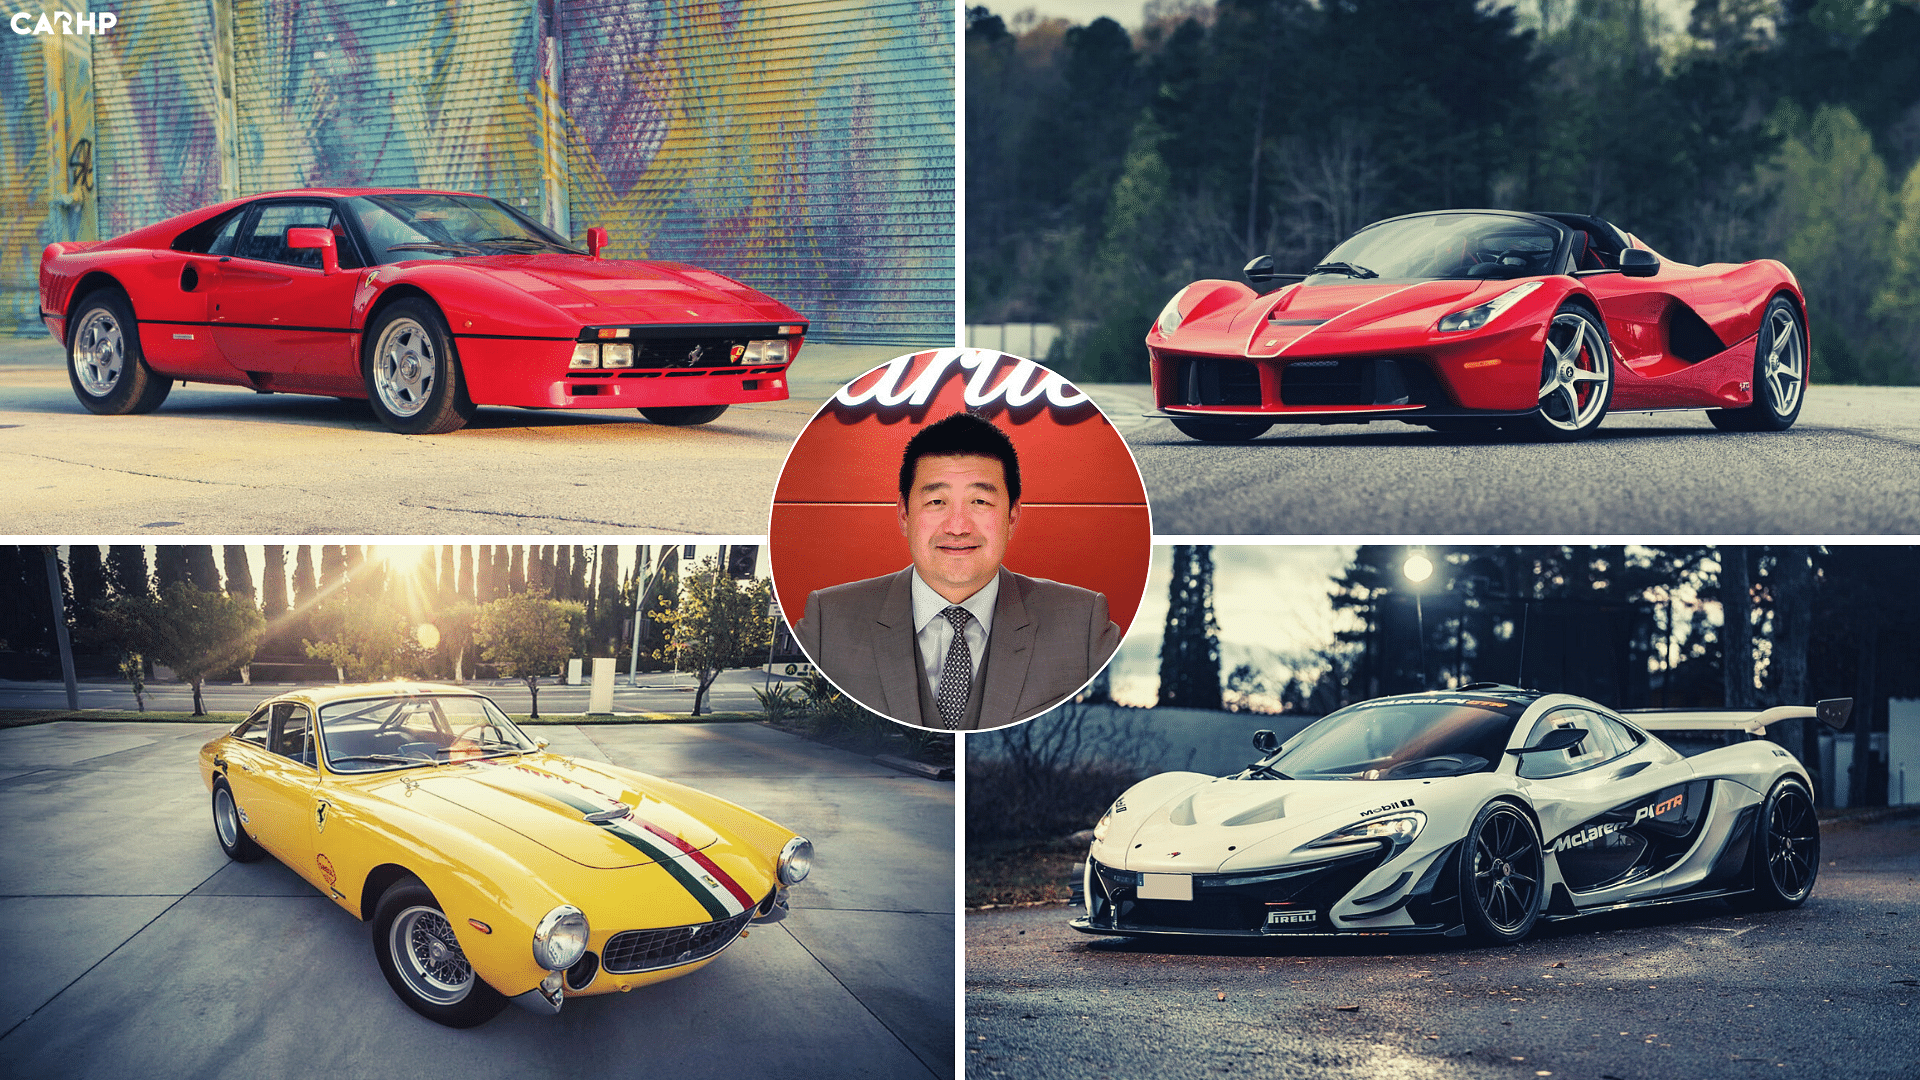 A Look Inside David Lee's $50 Million Car Collection